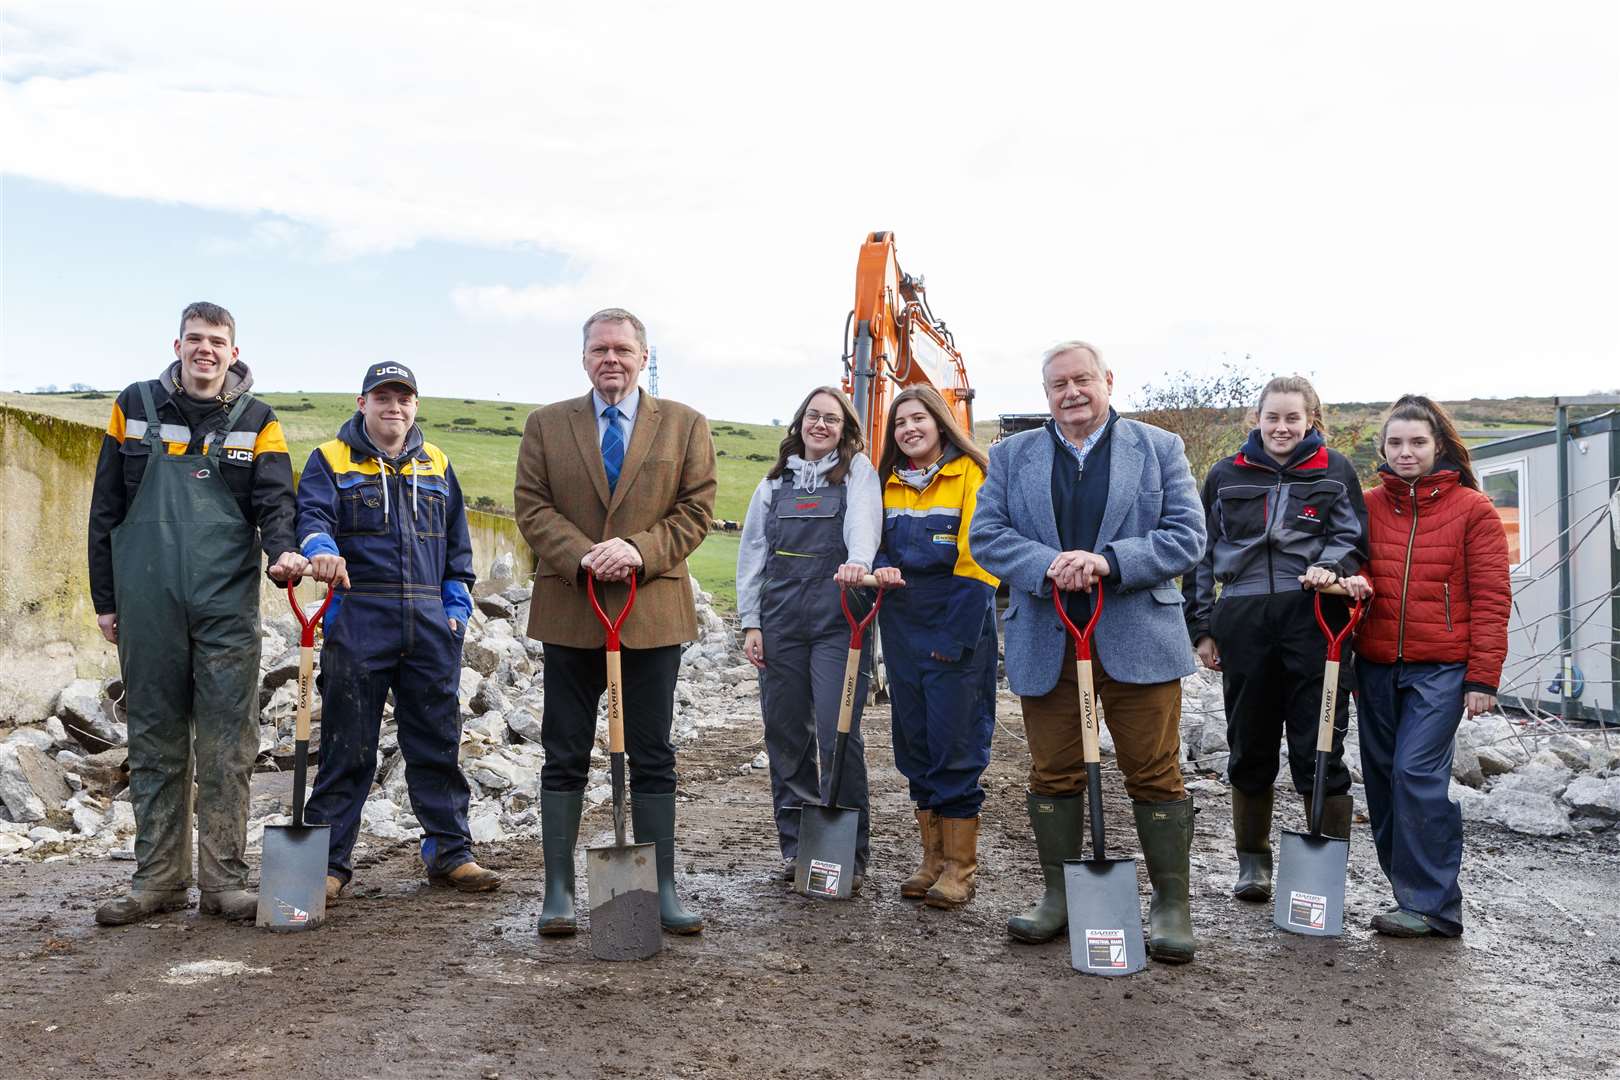 Professor Wayne Powell (SRUC) and Andrew Connon (NFUS) break ground on the new site with NC agricultural students.